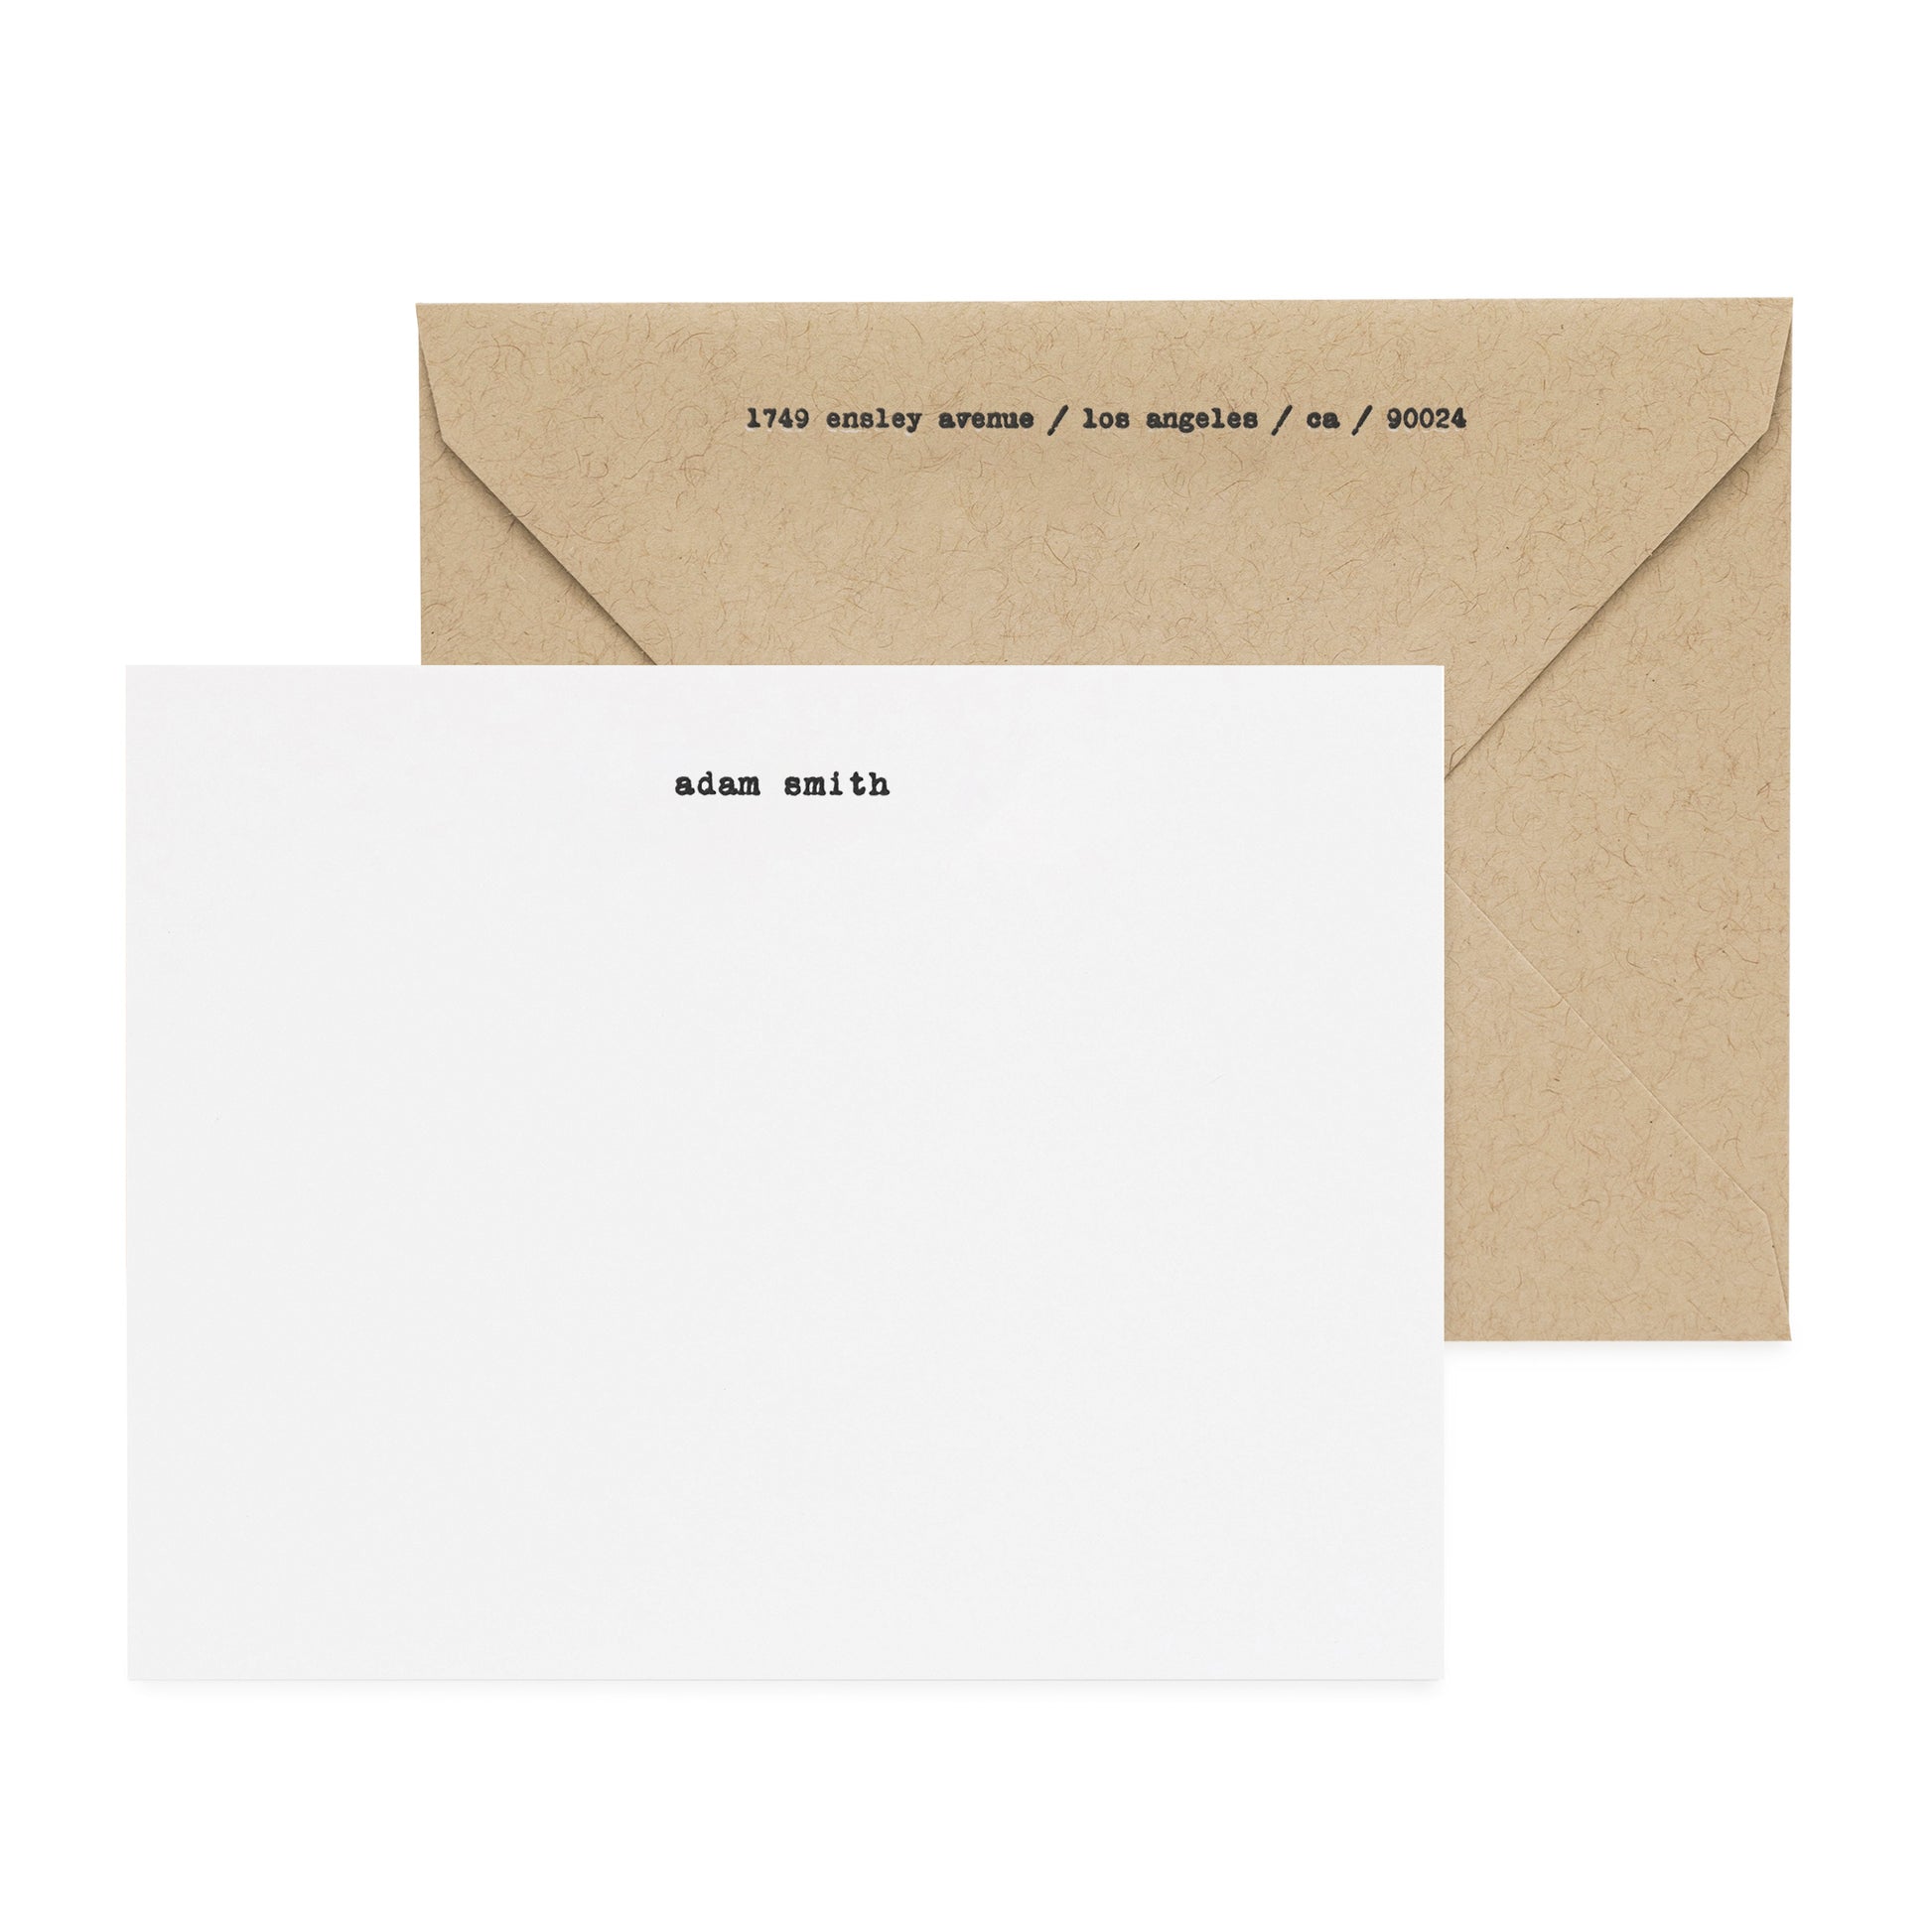 Black letterpress printed custom stationery paired with a kraft envelope